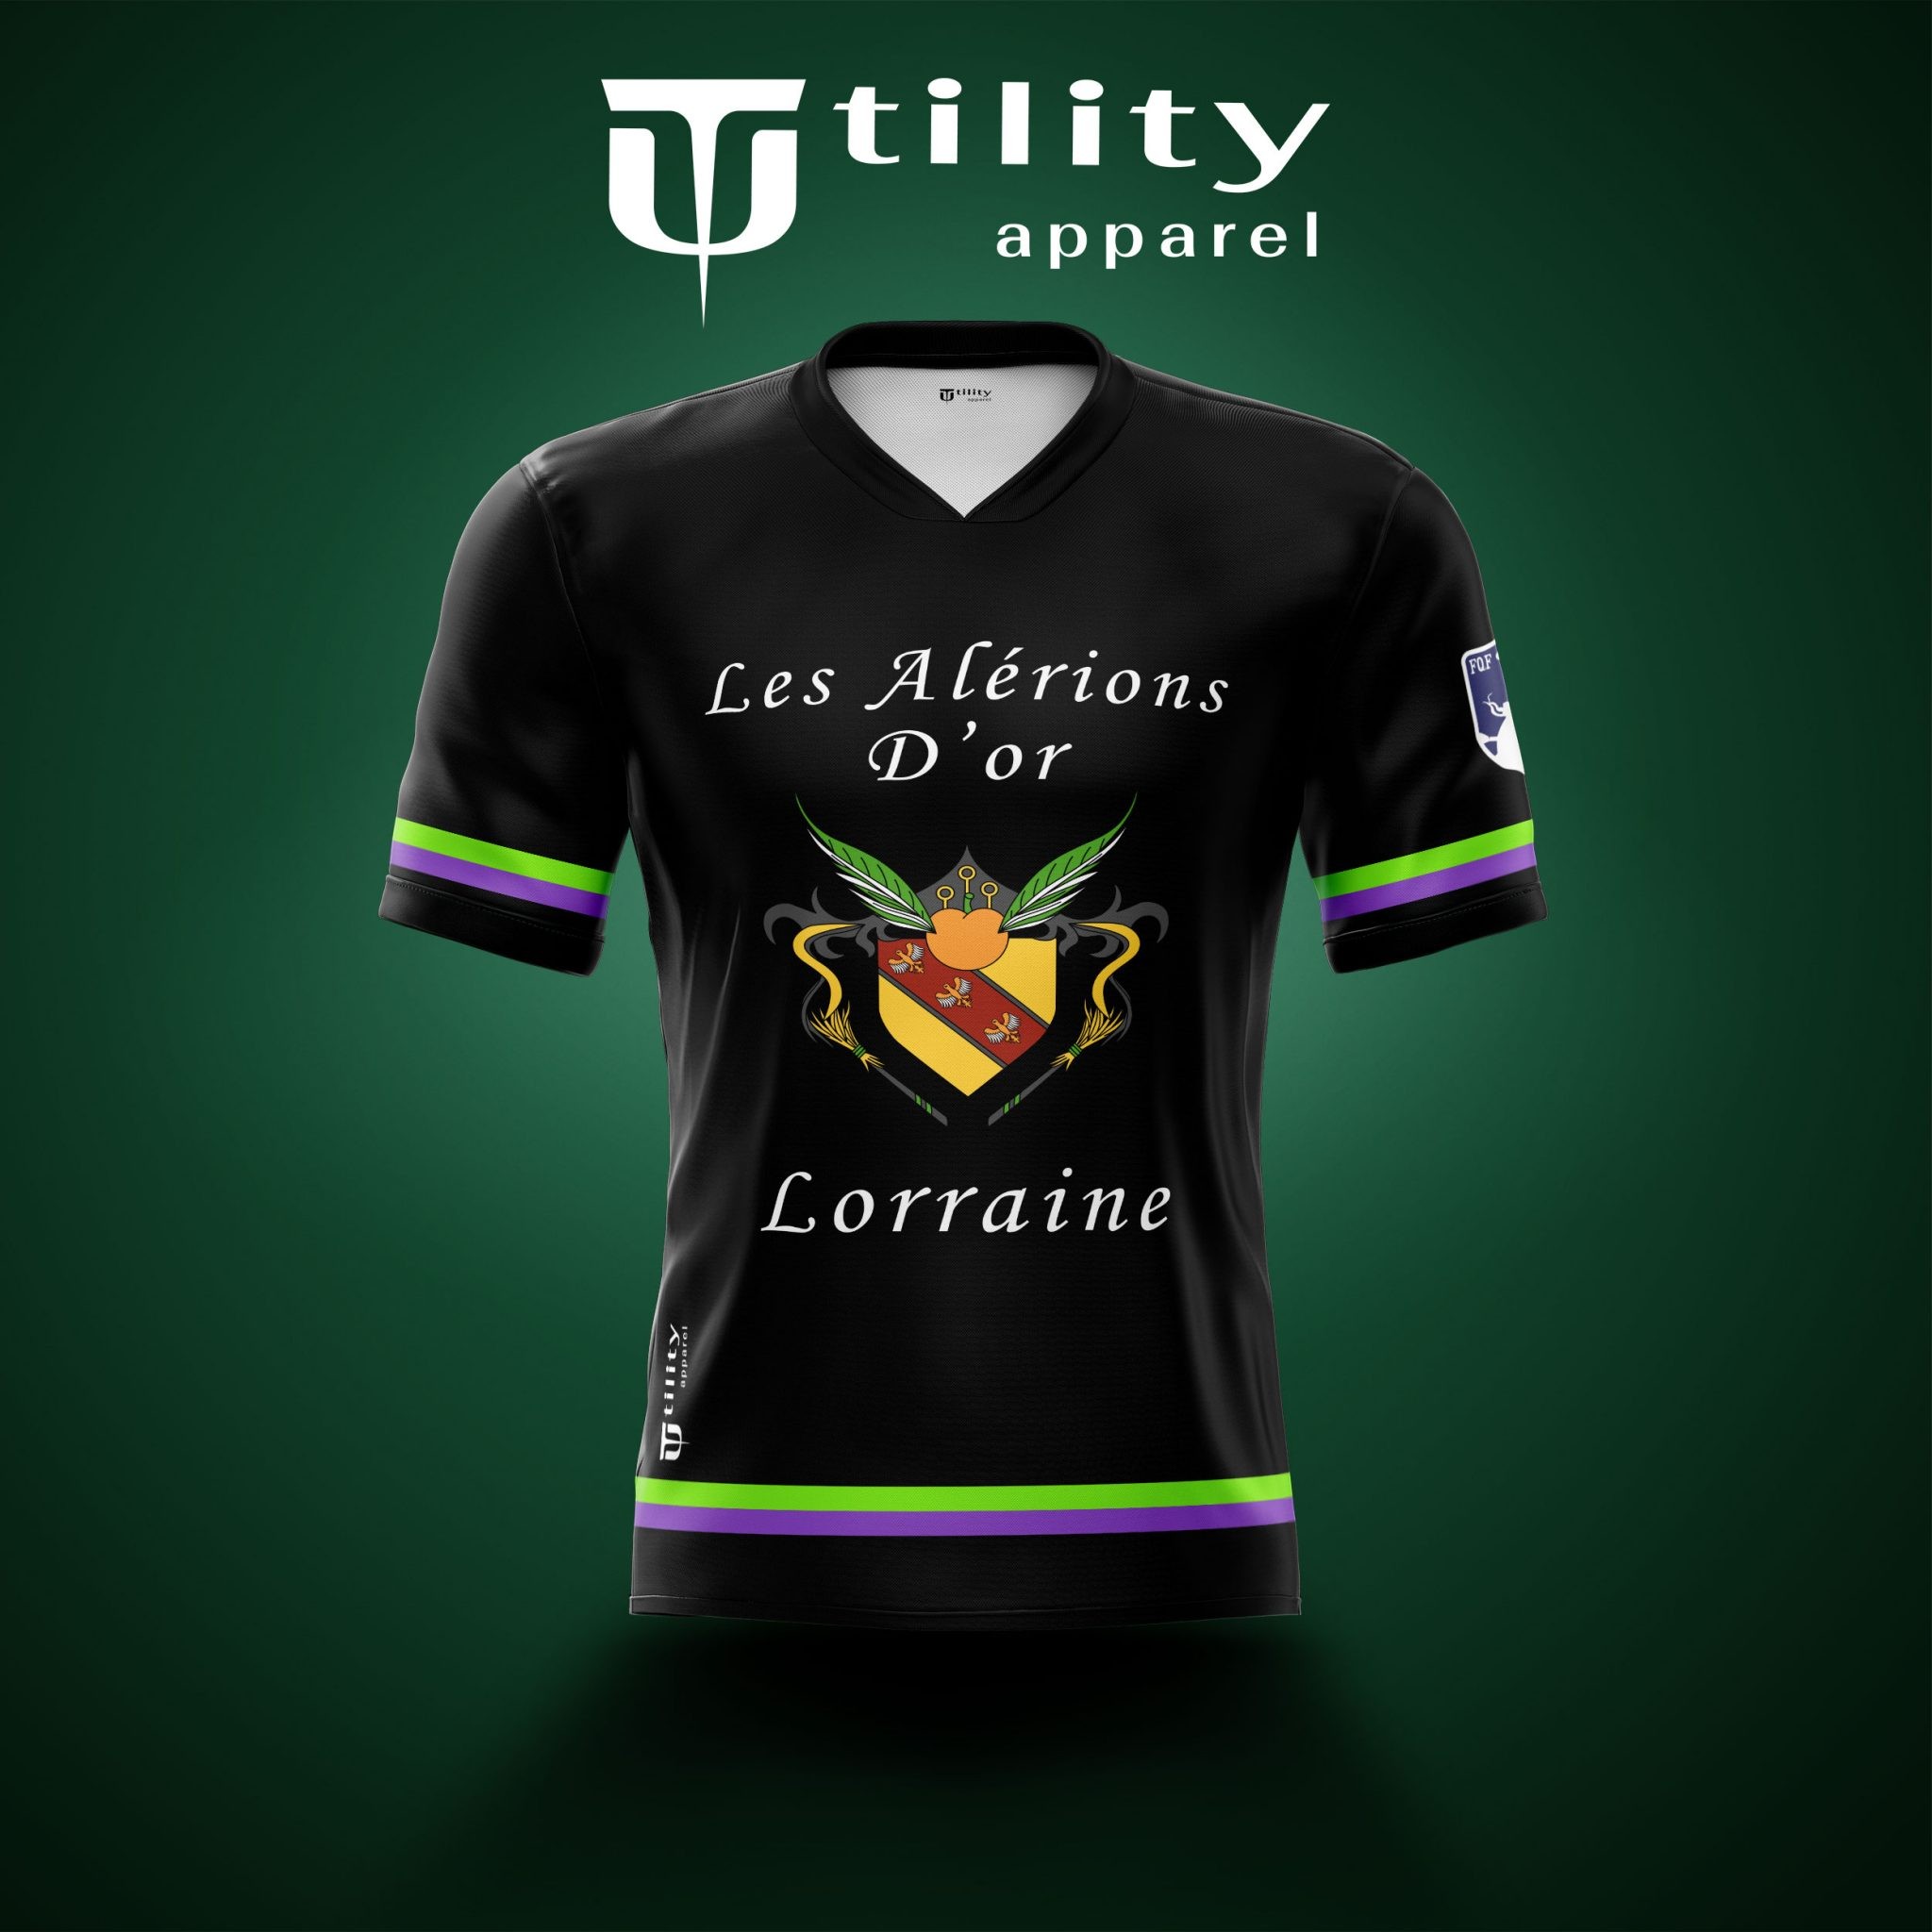 Les Alérions d'Or Jersey